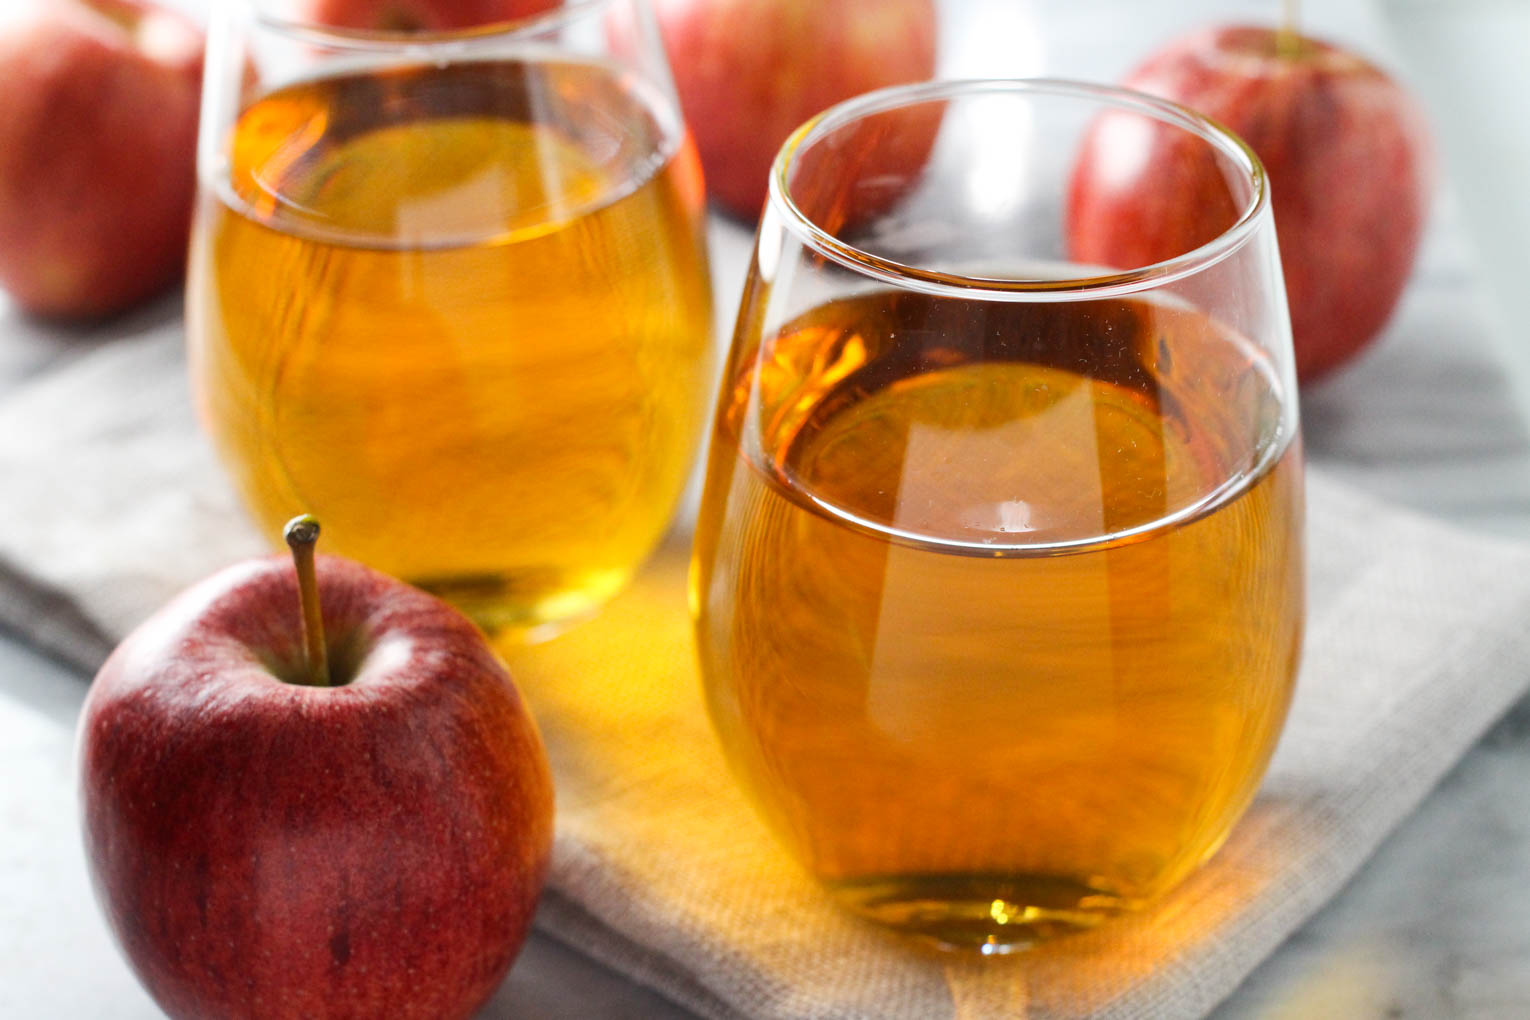 Two glasses with apple juice standing on a napkin. One apple in front of the glasses and a few behind the glasses.